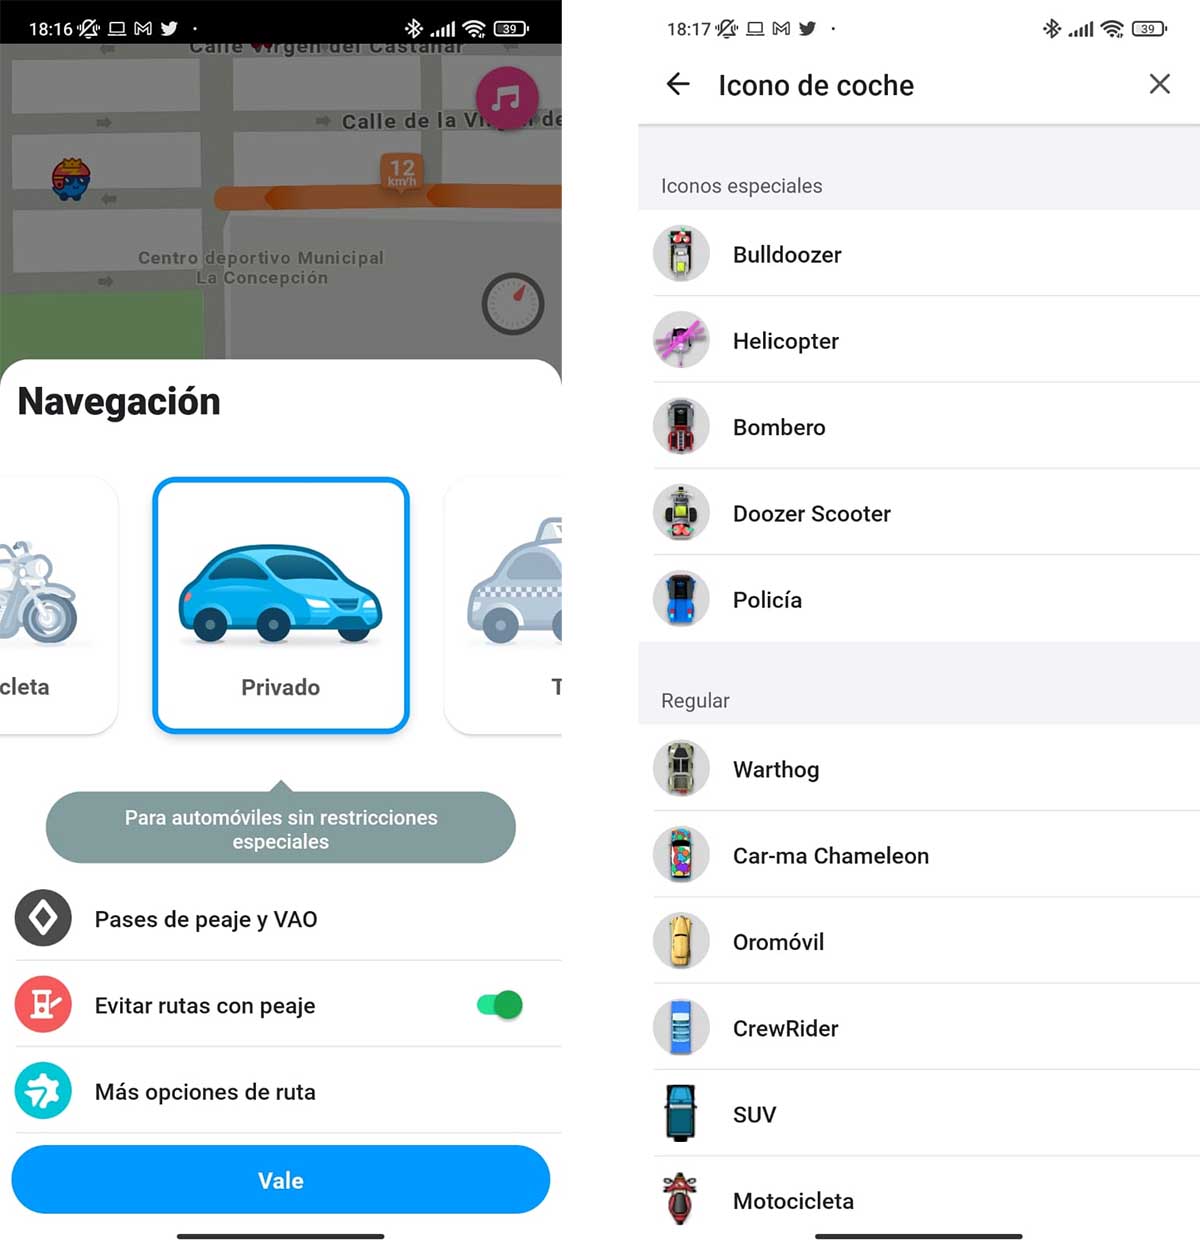 how to change your vehicle in Waze